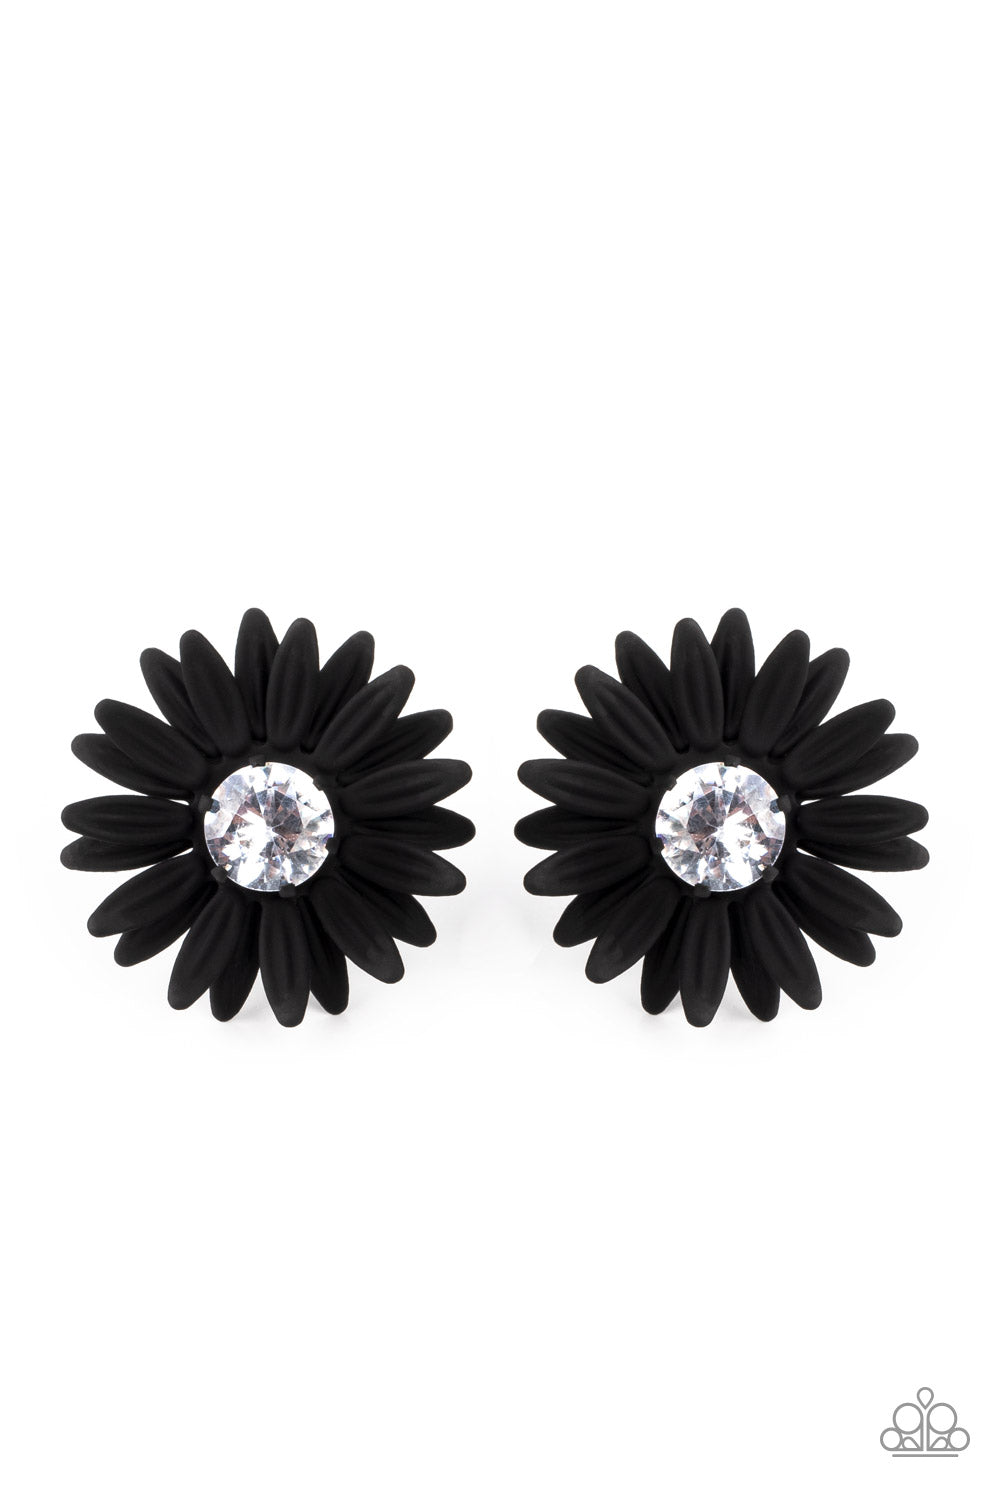 Sunshiny DAIS-y Black Post Earring - Paparazzi Accessories  Layers of black petals fan out from an oversized white rhinestone fitting, blooming into a sparkly floral centerpiece. Earring attaches to a standard post fitting.  Sold as one pair of post earrings.